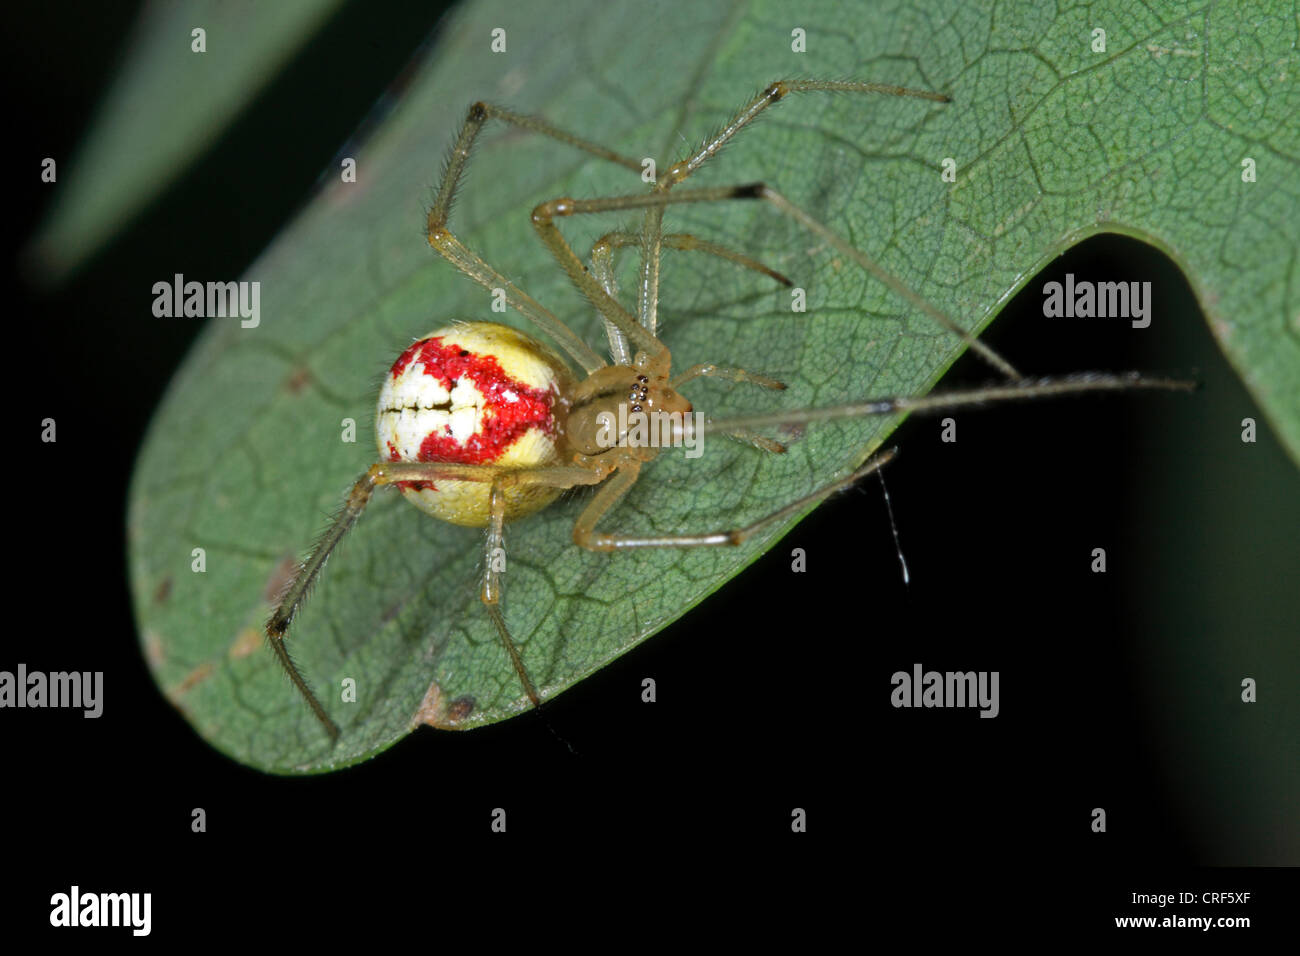 red-and-white spider (Enoplognatha ovata, Enoplognatha lineata, Theridion redimitum), female, sitting on a leaf Stock Photo